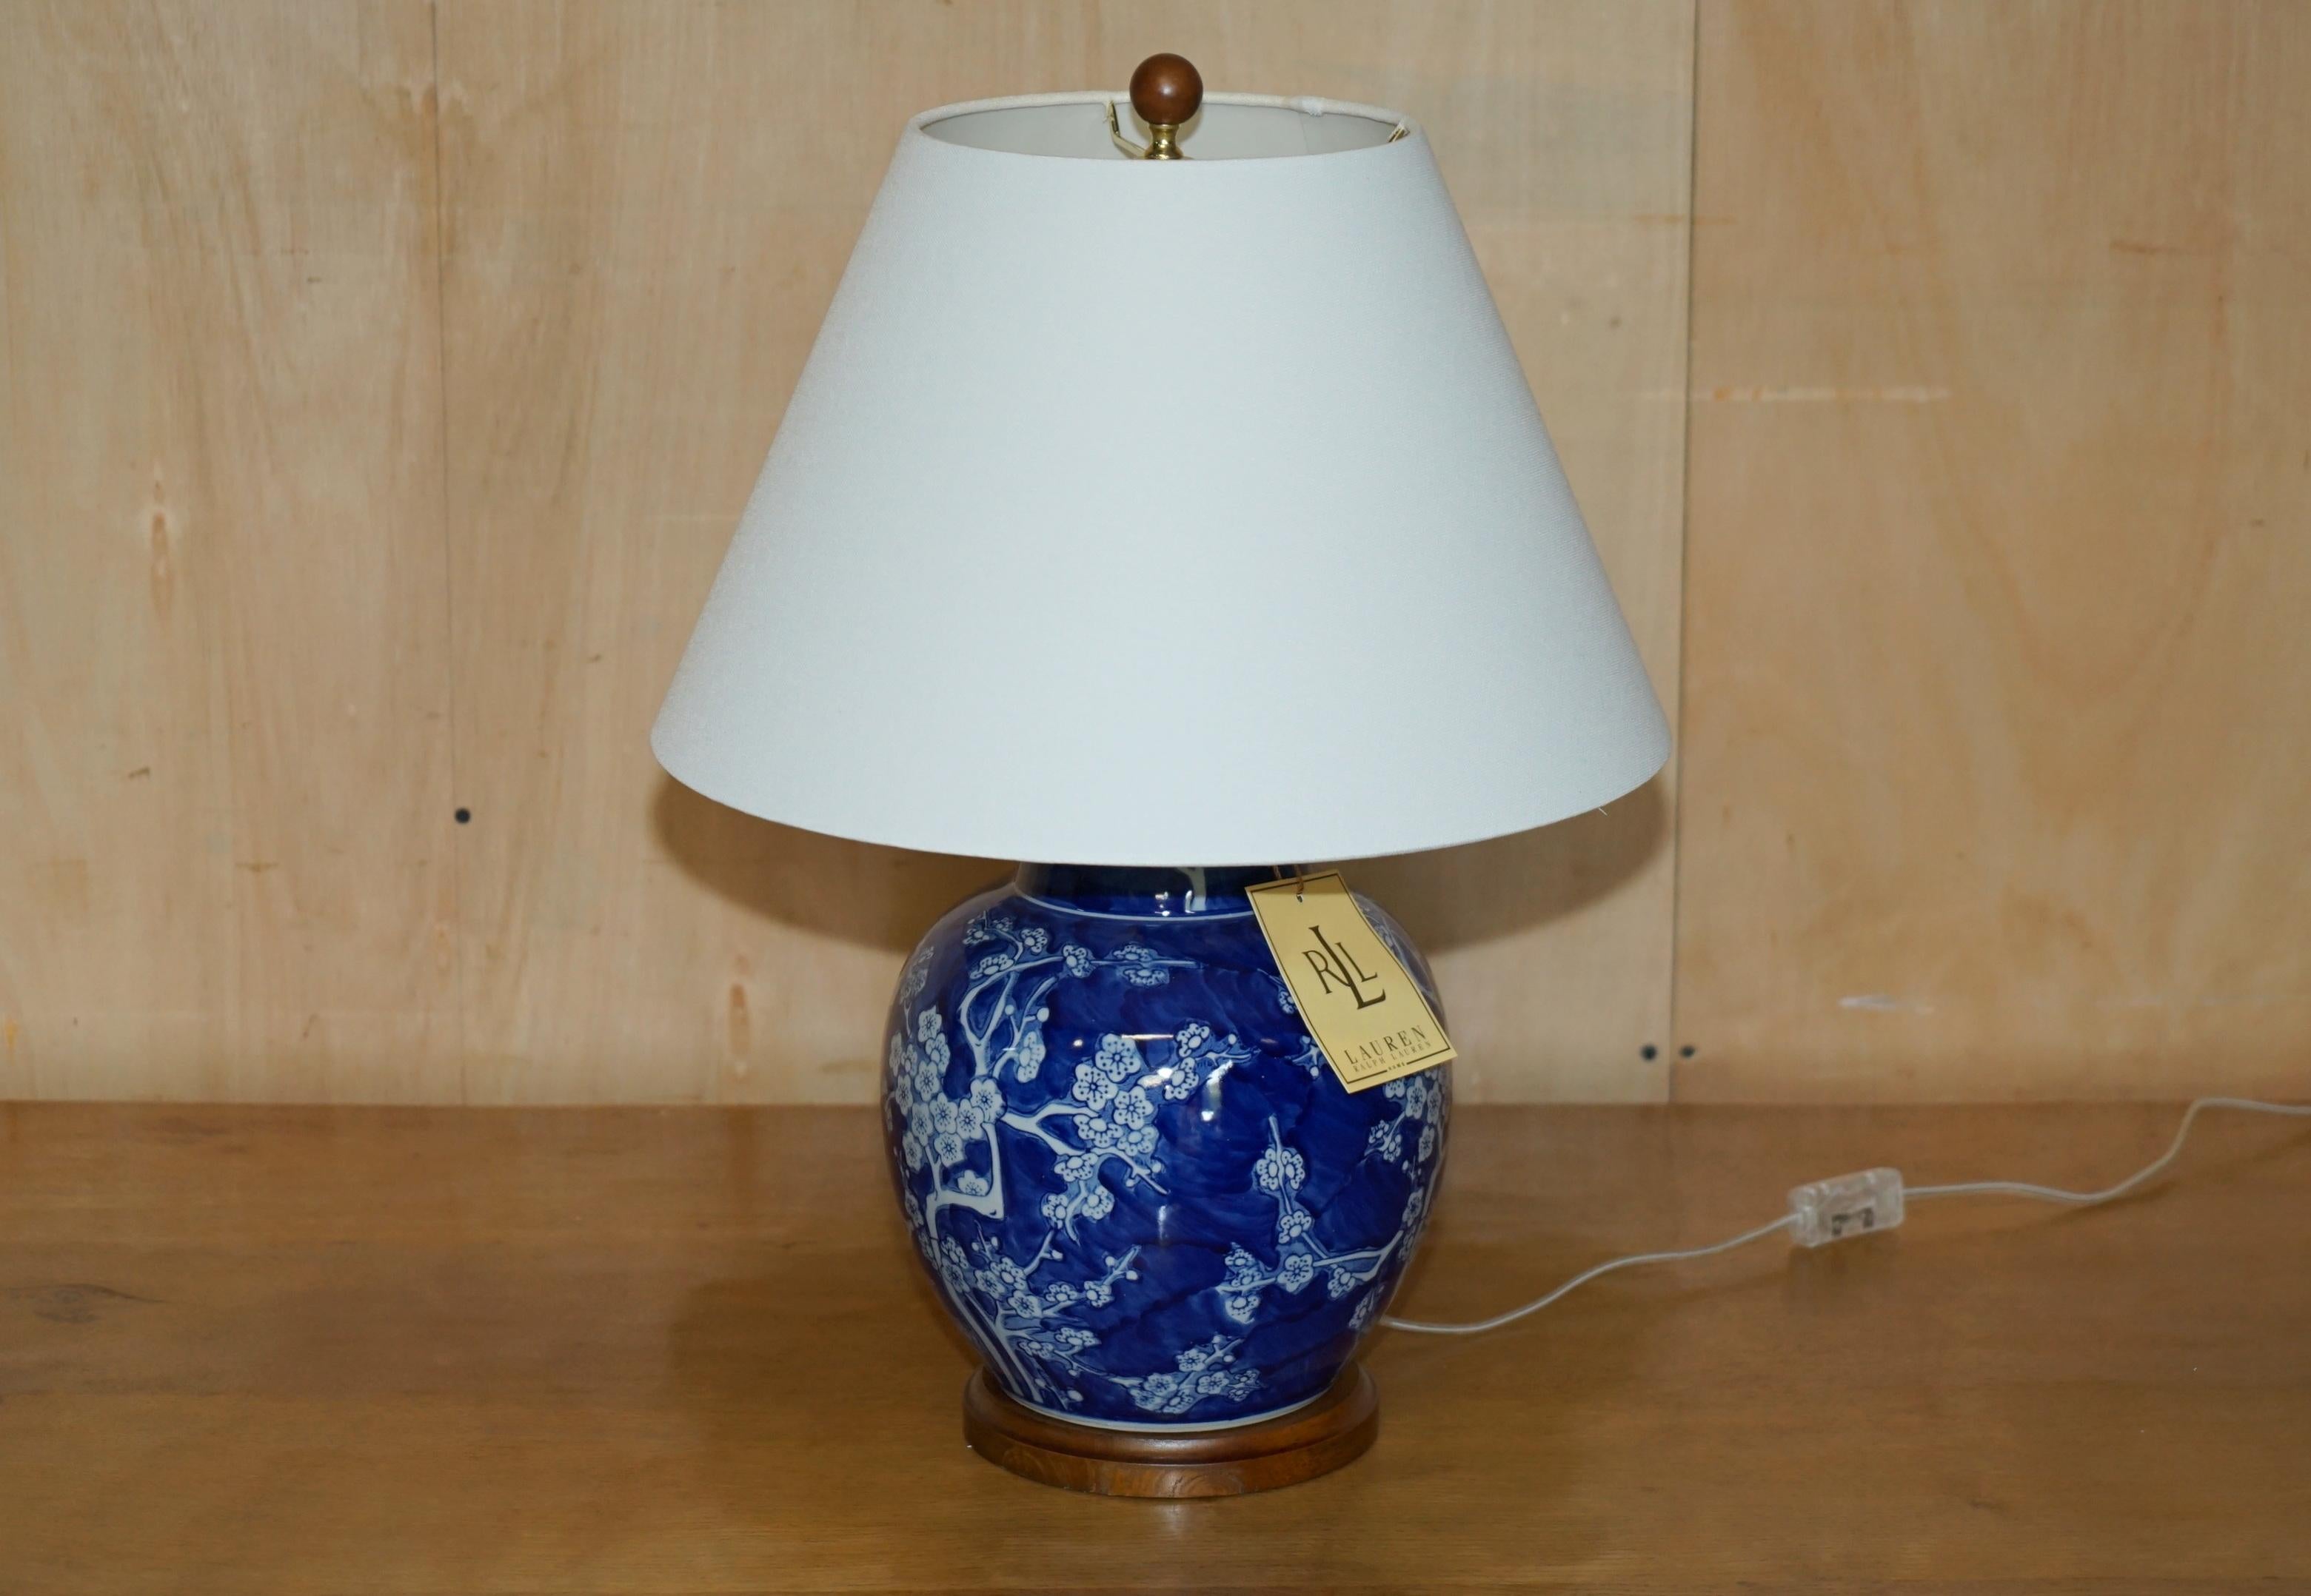 Royal House Antiques

Royal House Antiques is delighted to offer for sale 1 of 6 brand new in the original box Ralph Lauren Cobalt Blue & White Chinese Ceramic Porcelain tables lamps 

This lamp is part of a massive suite of Ralph Lauren lamps we